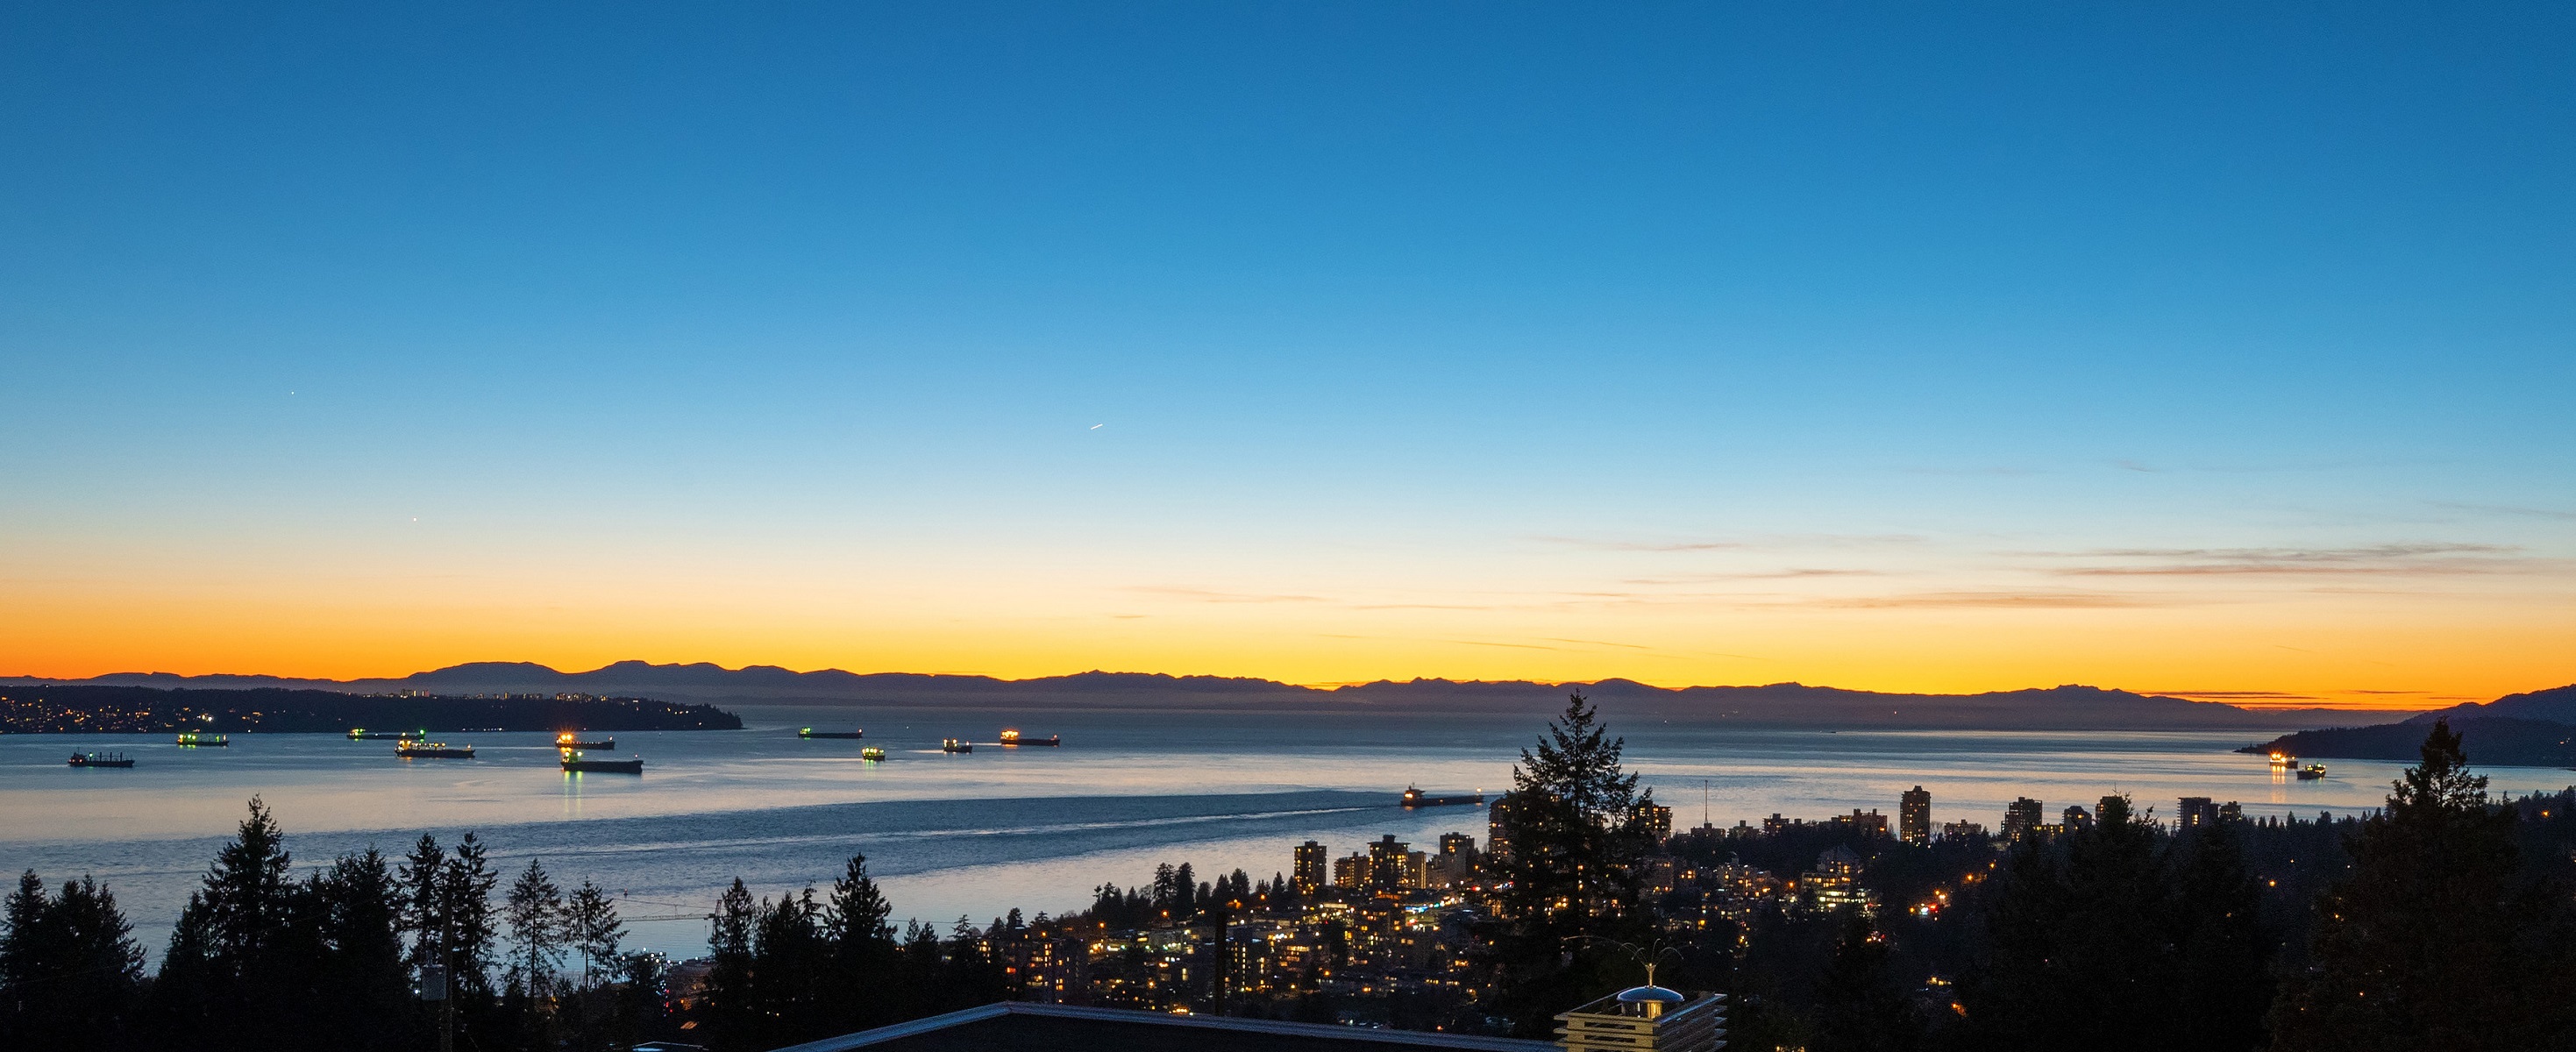 West Vancouver Homes for Sale